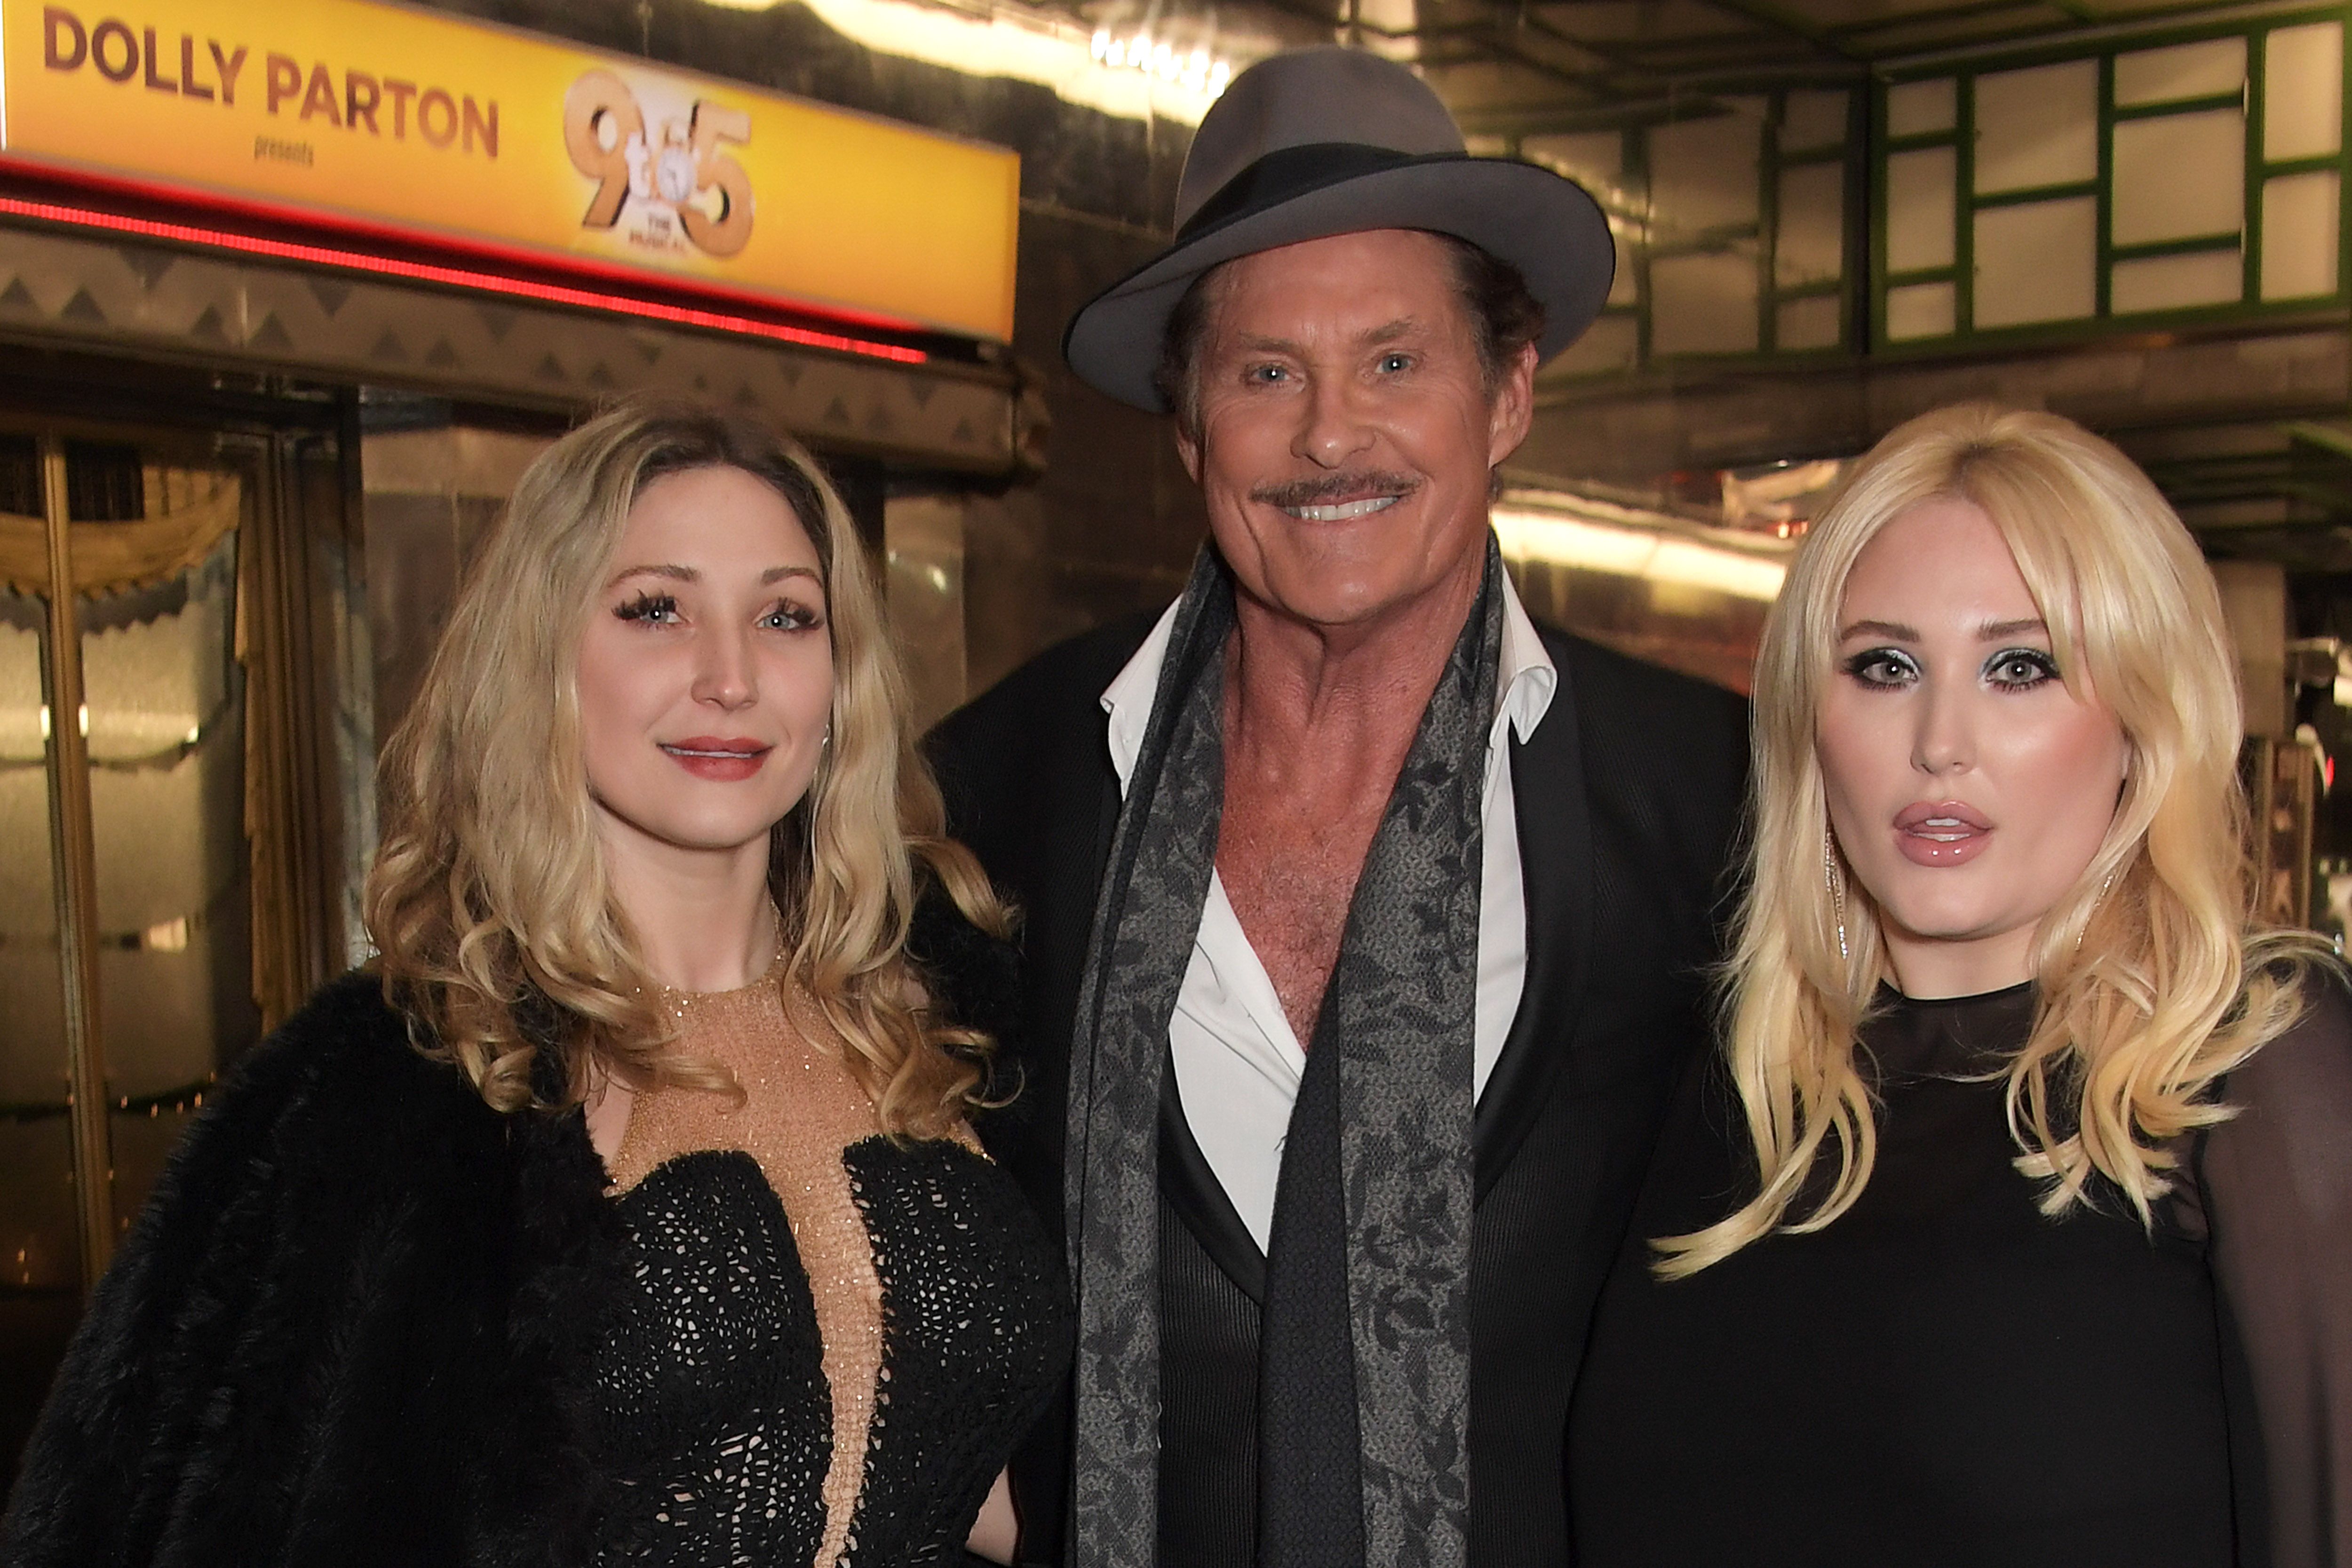 Taylor-Ann Hasselhoff, David Hasselhoff and Hayley Hasselhoff in London in December 2019, after the actor joined the cast of  "9 To 5: The Musical" | Source: Getty Images